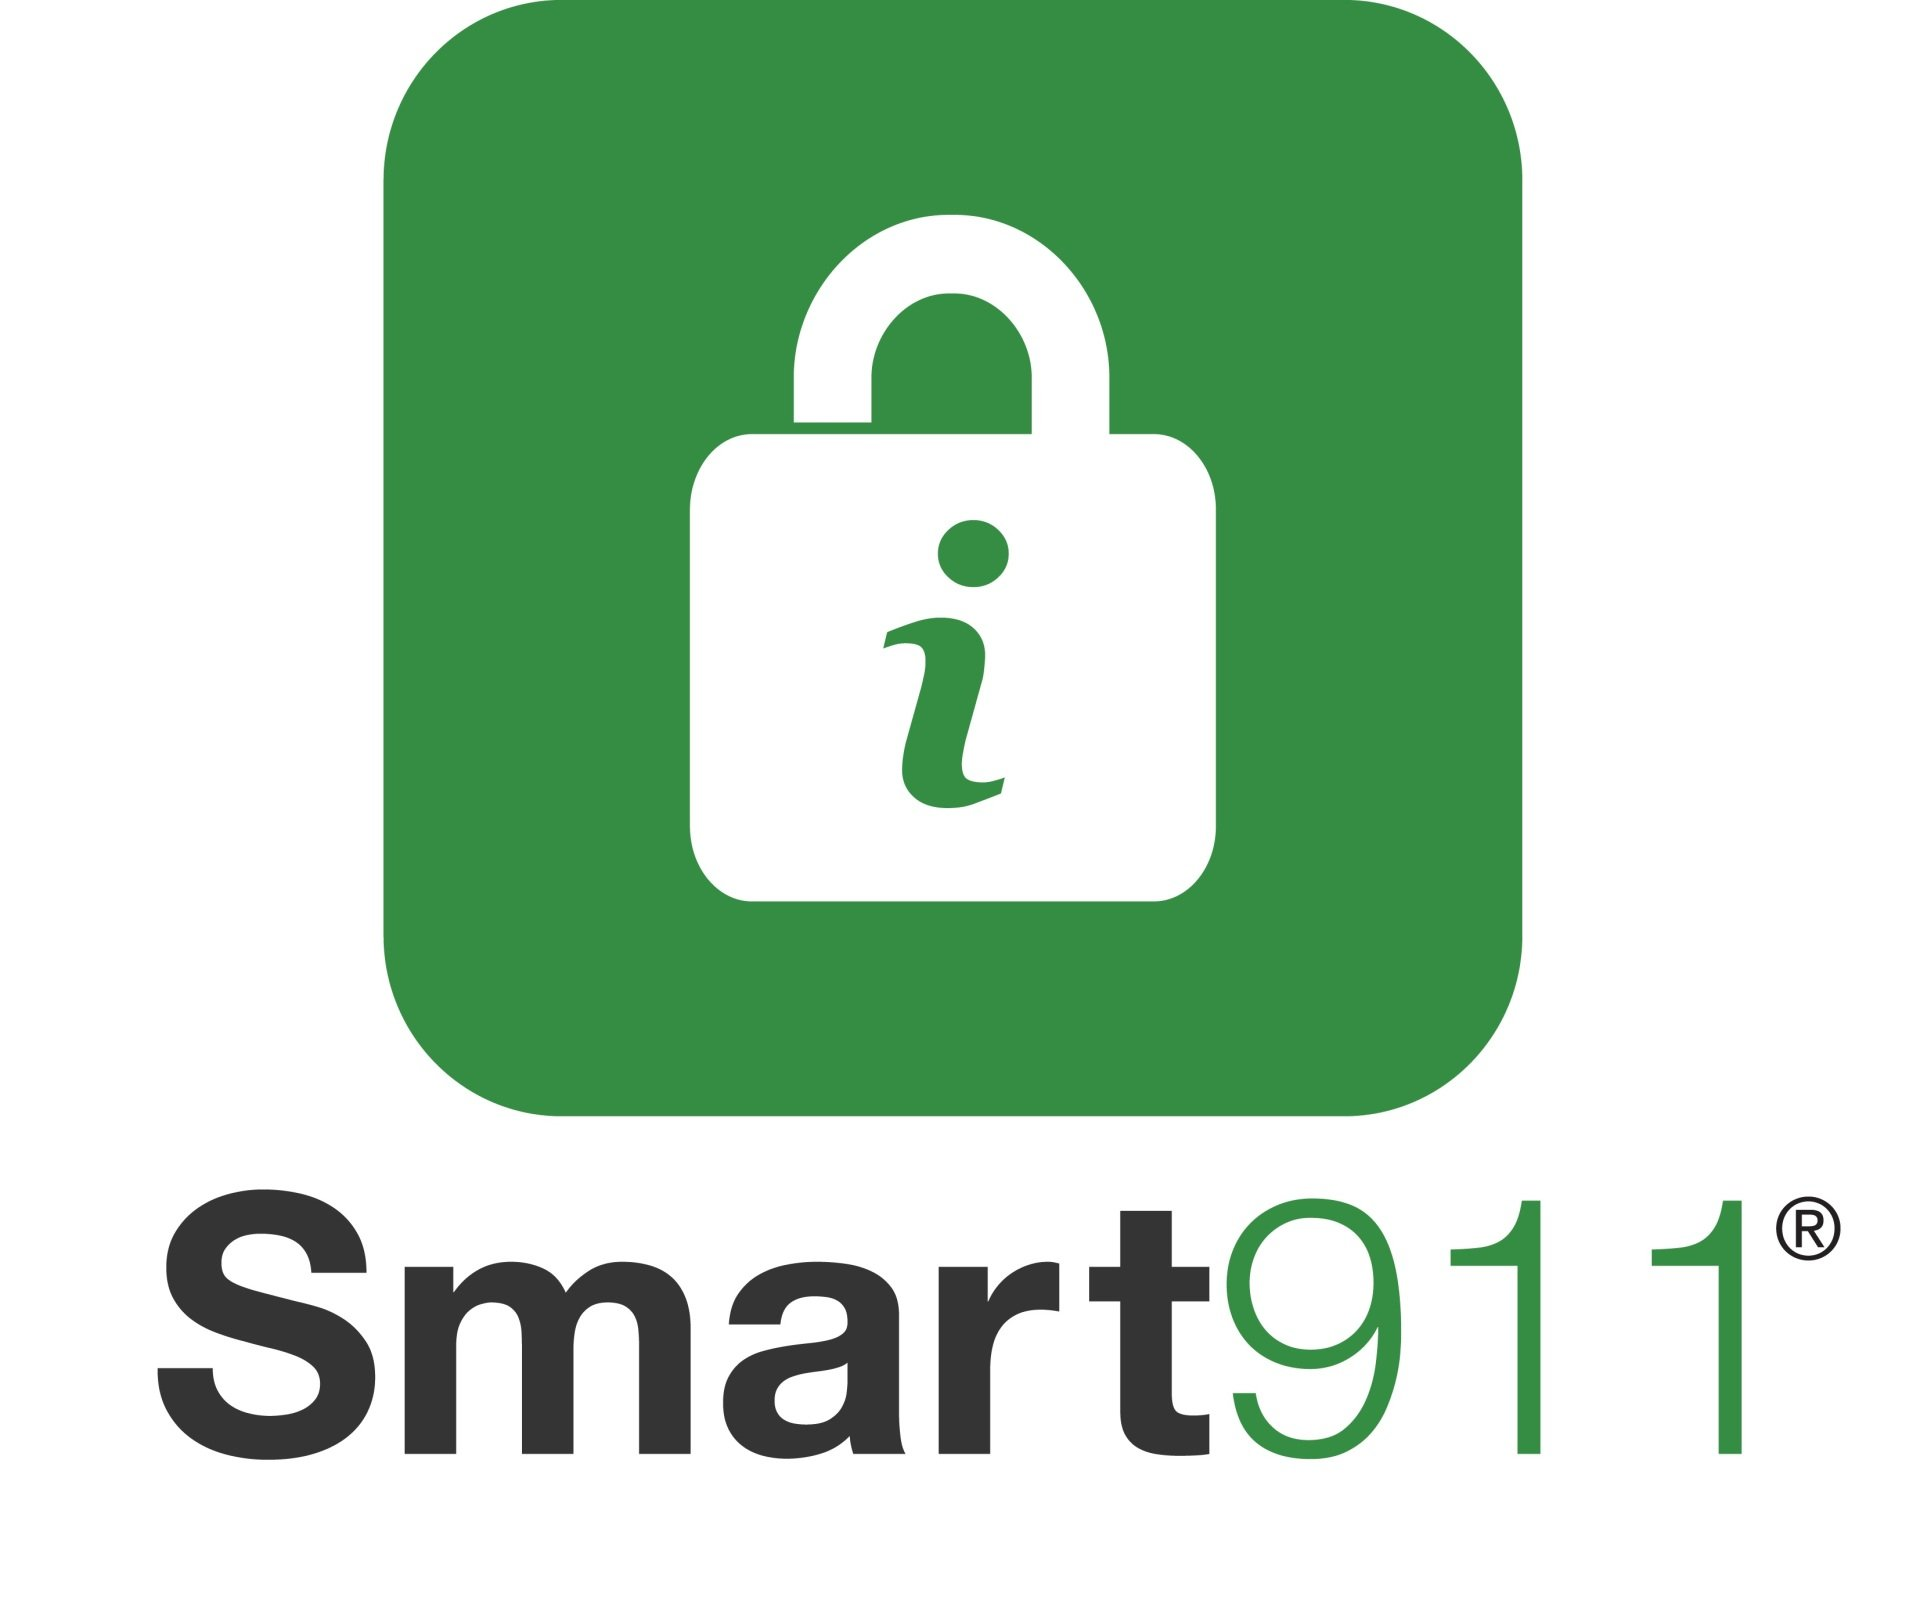 A green square with a white padlock and the words `` smart911 '' below it.